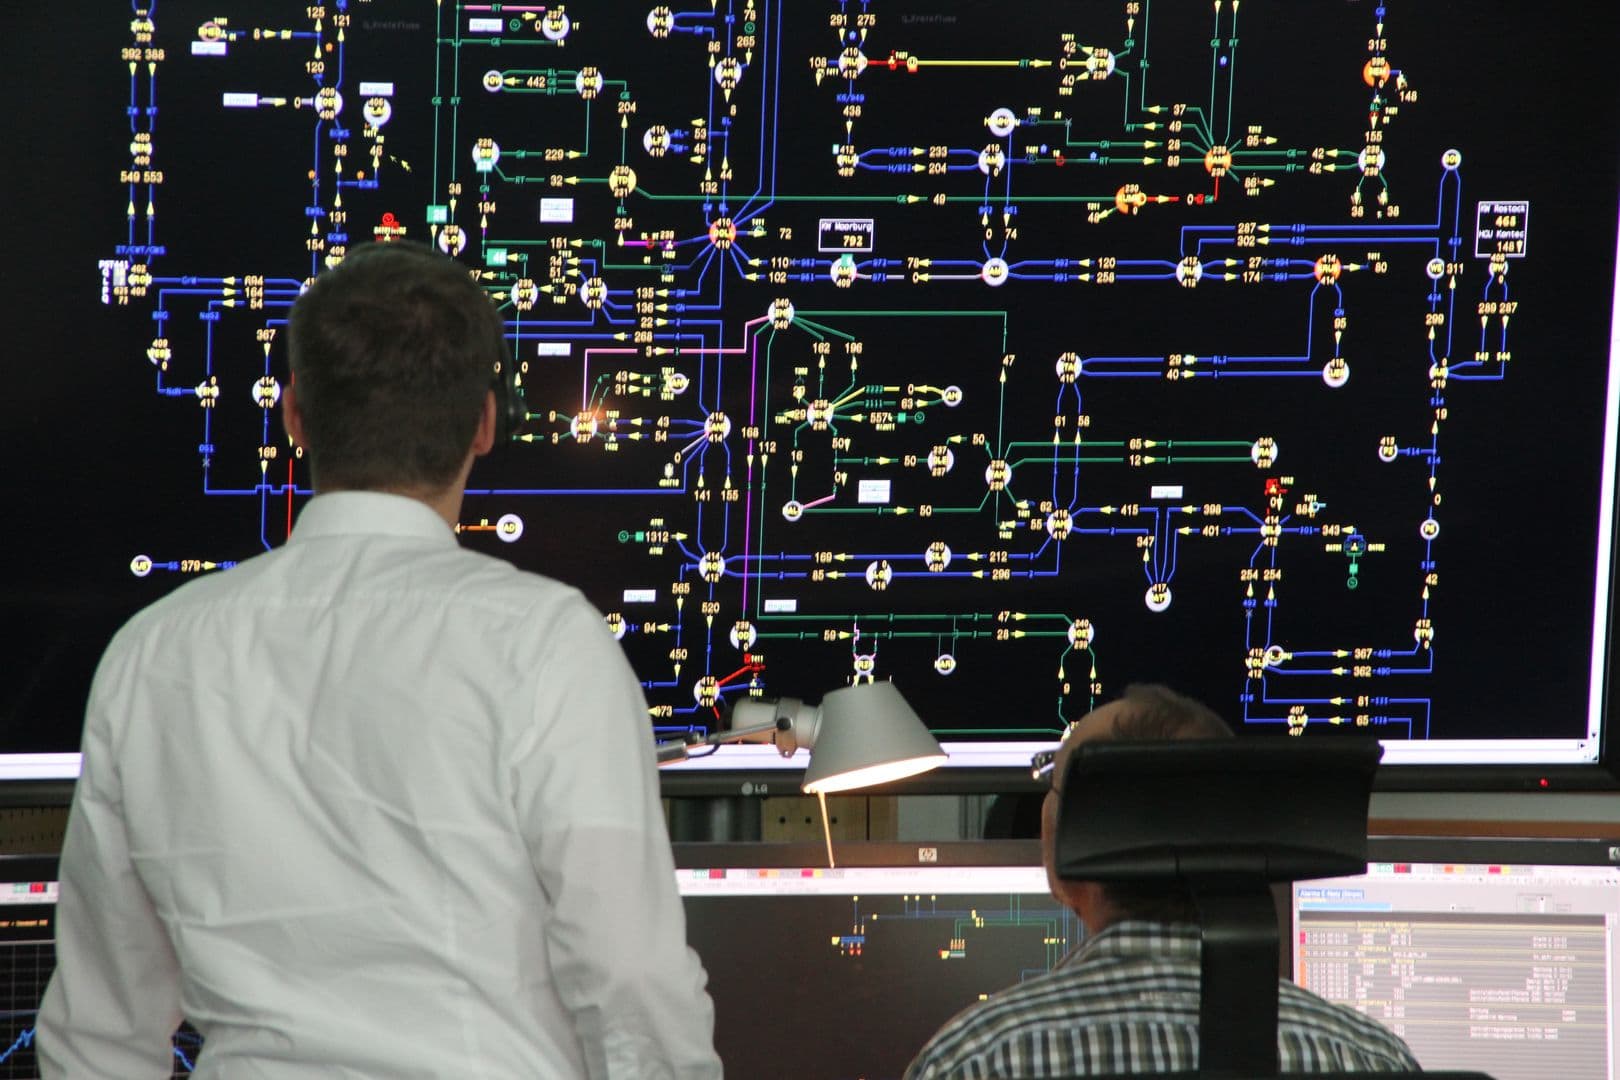 Control Room of the Future